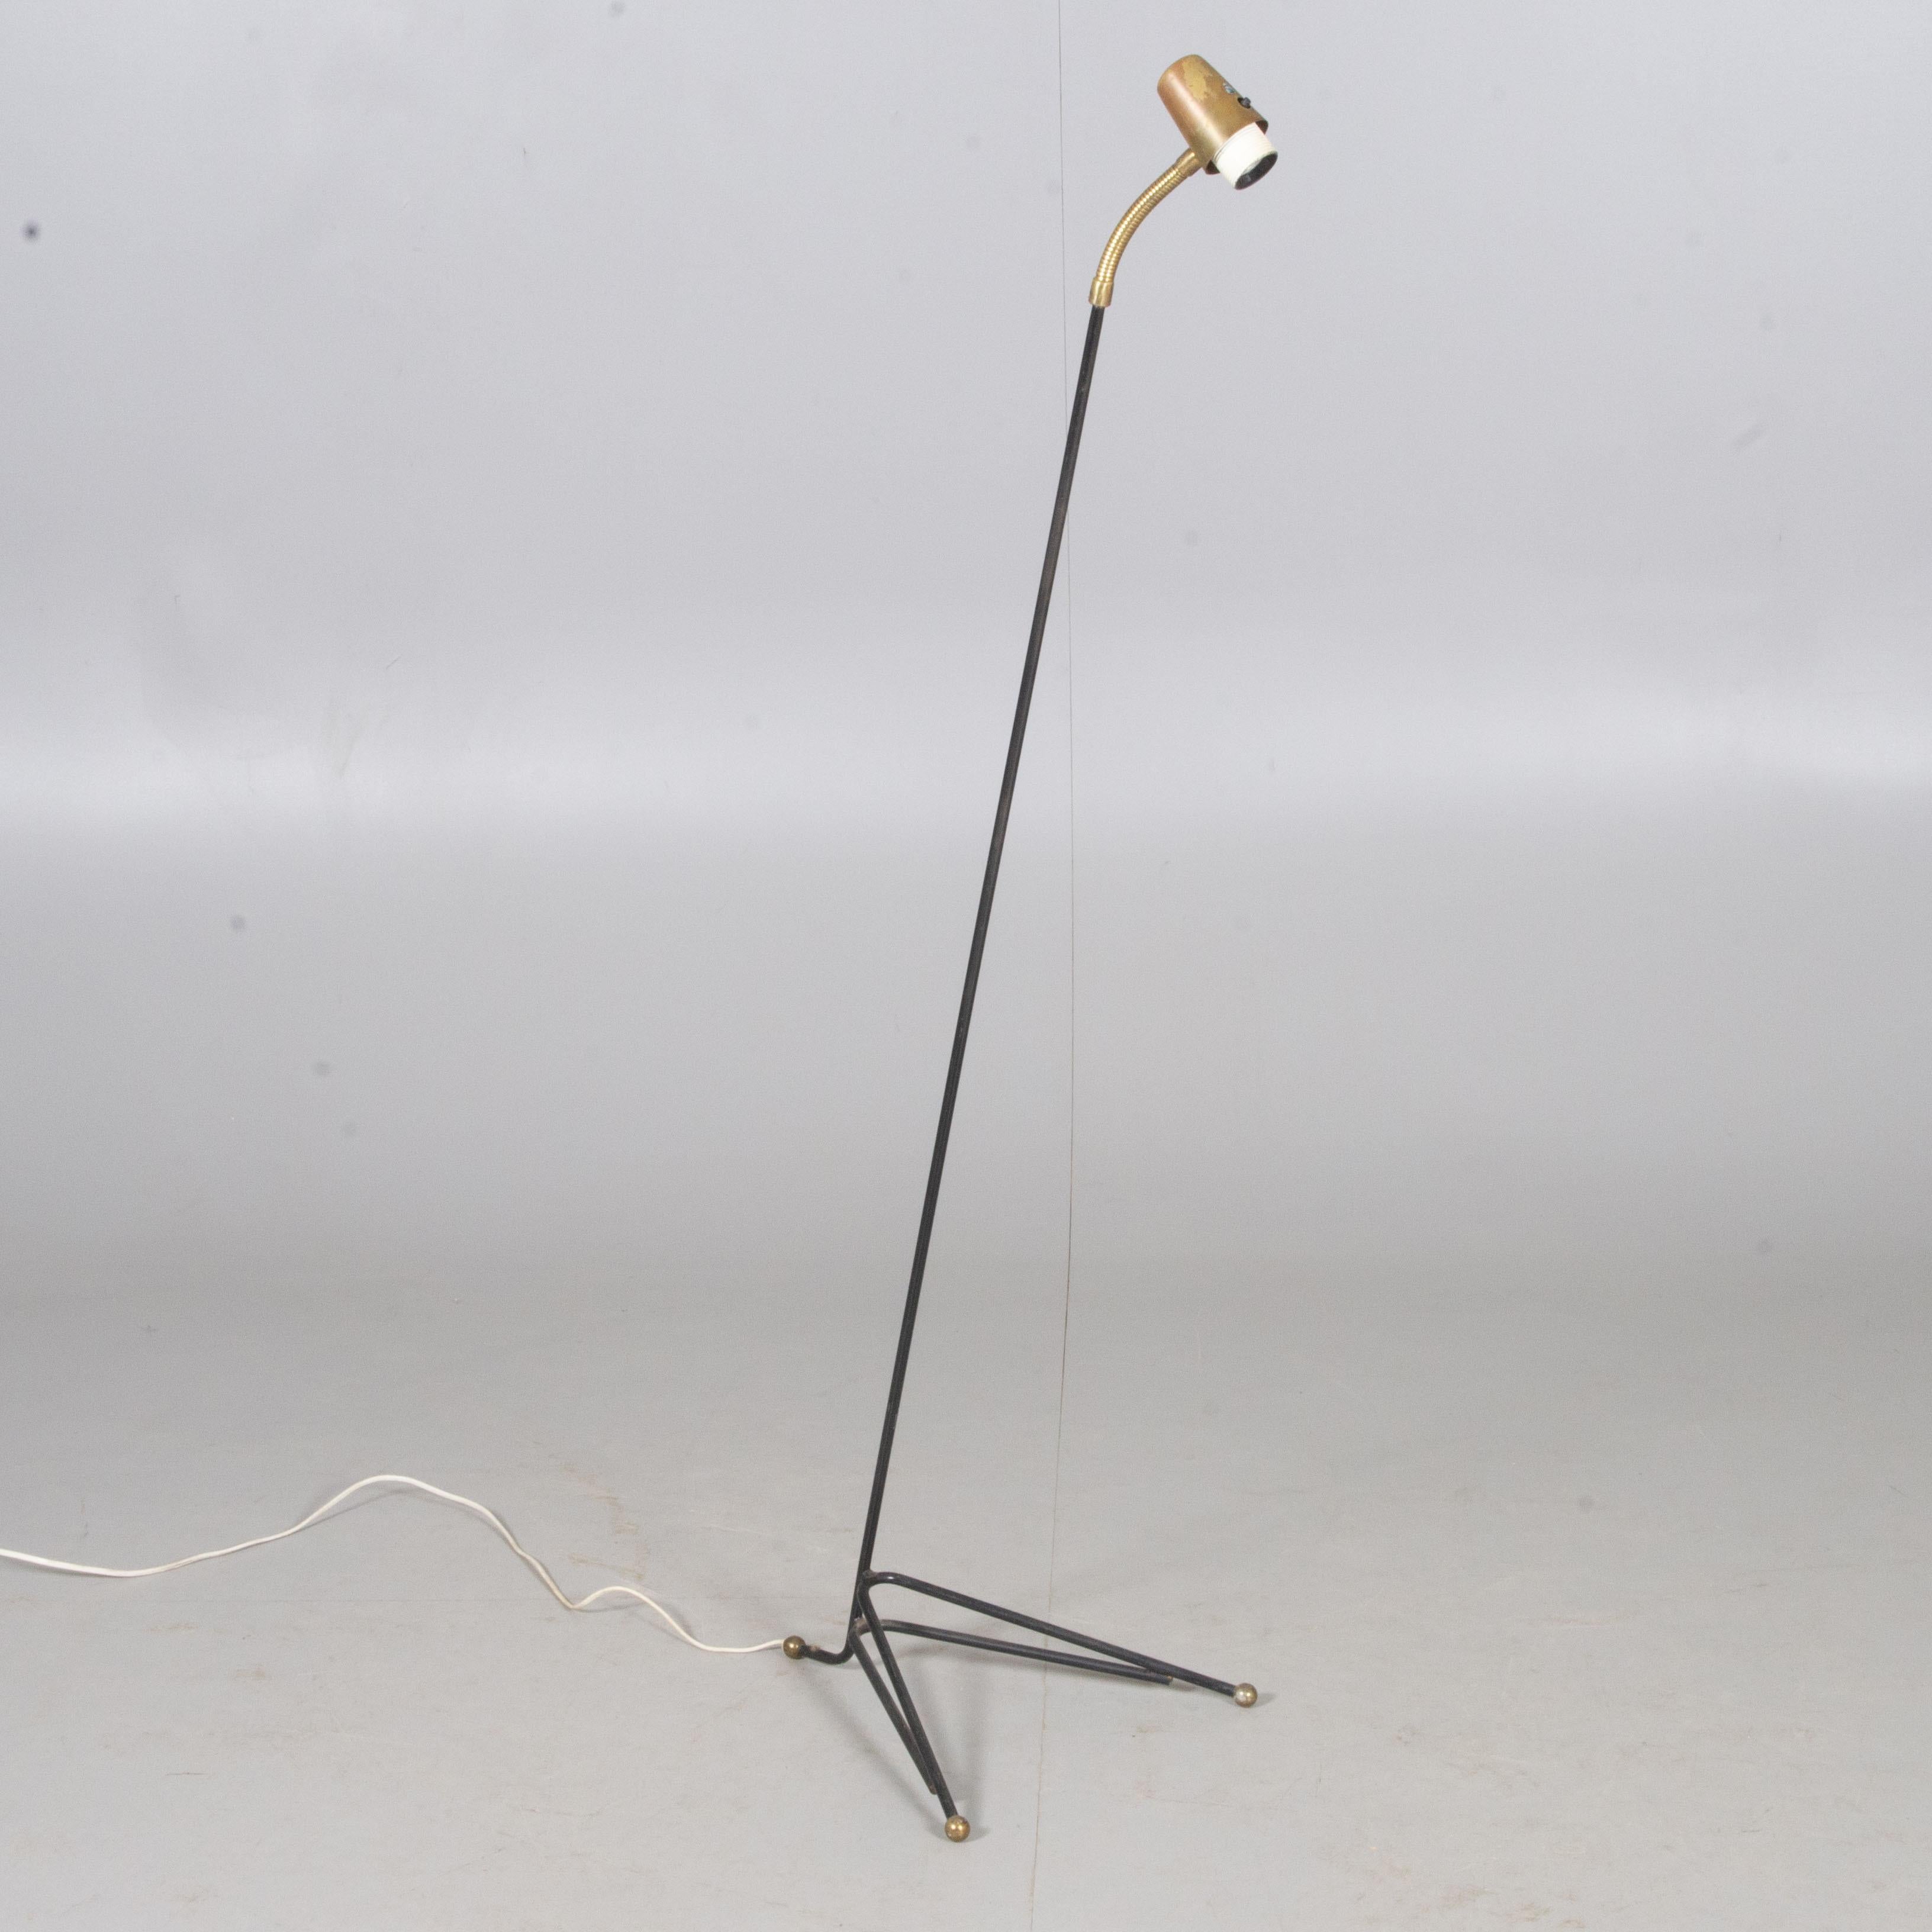 Midcentury Swedish black floor lamp by EAE. Adjustable reflector with flexible arm, with light switch on top. Purchased as loved the feet and works well with the Joseph Frank s in our collection. 


Measures: Height 53.5 in. (140 cm)
Width 14.57 in.